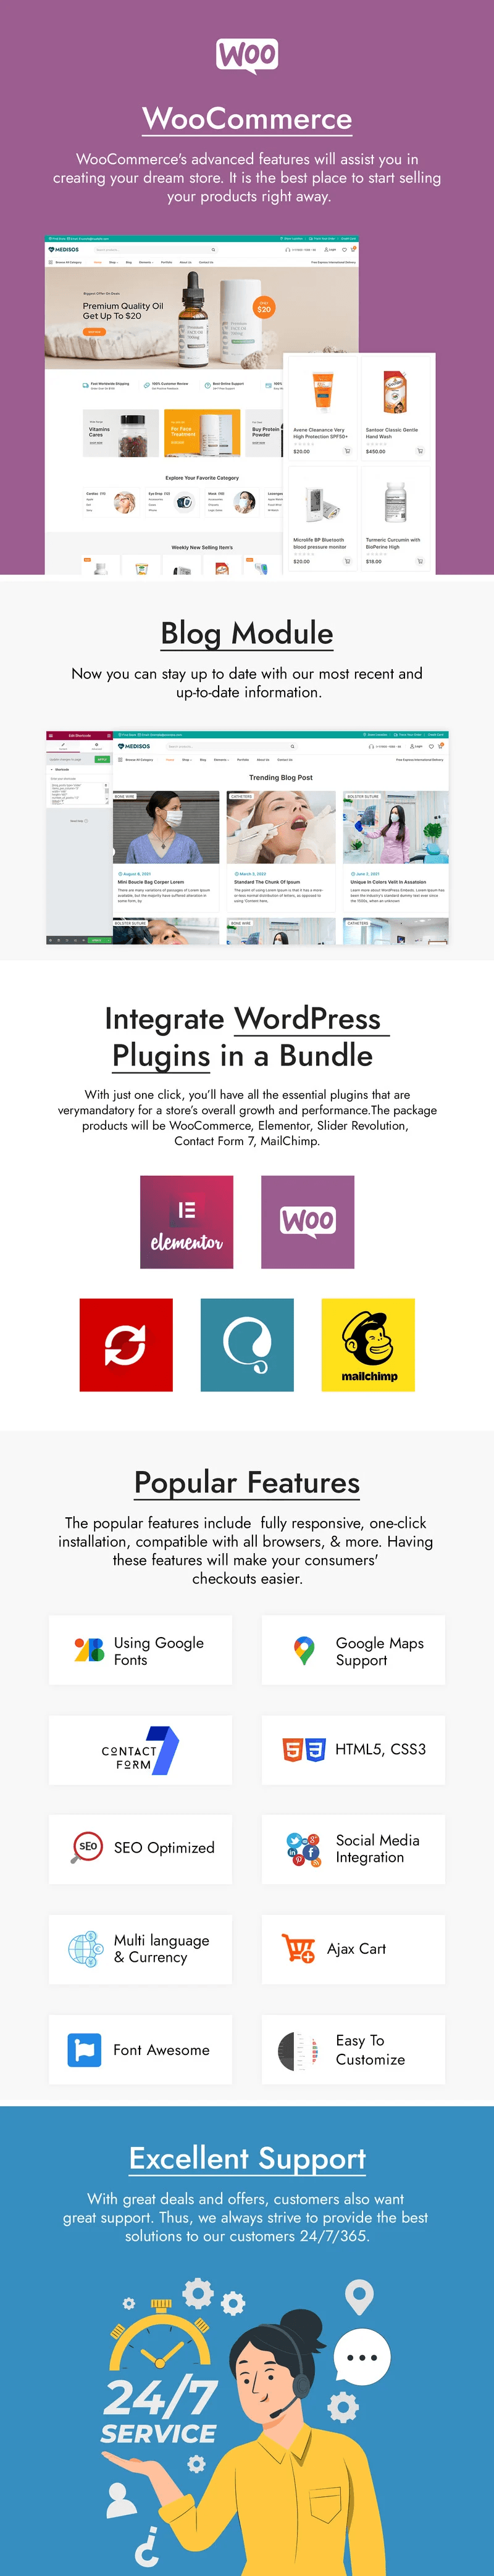 Scripts and image plugins.